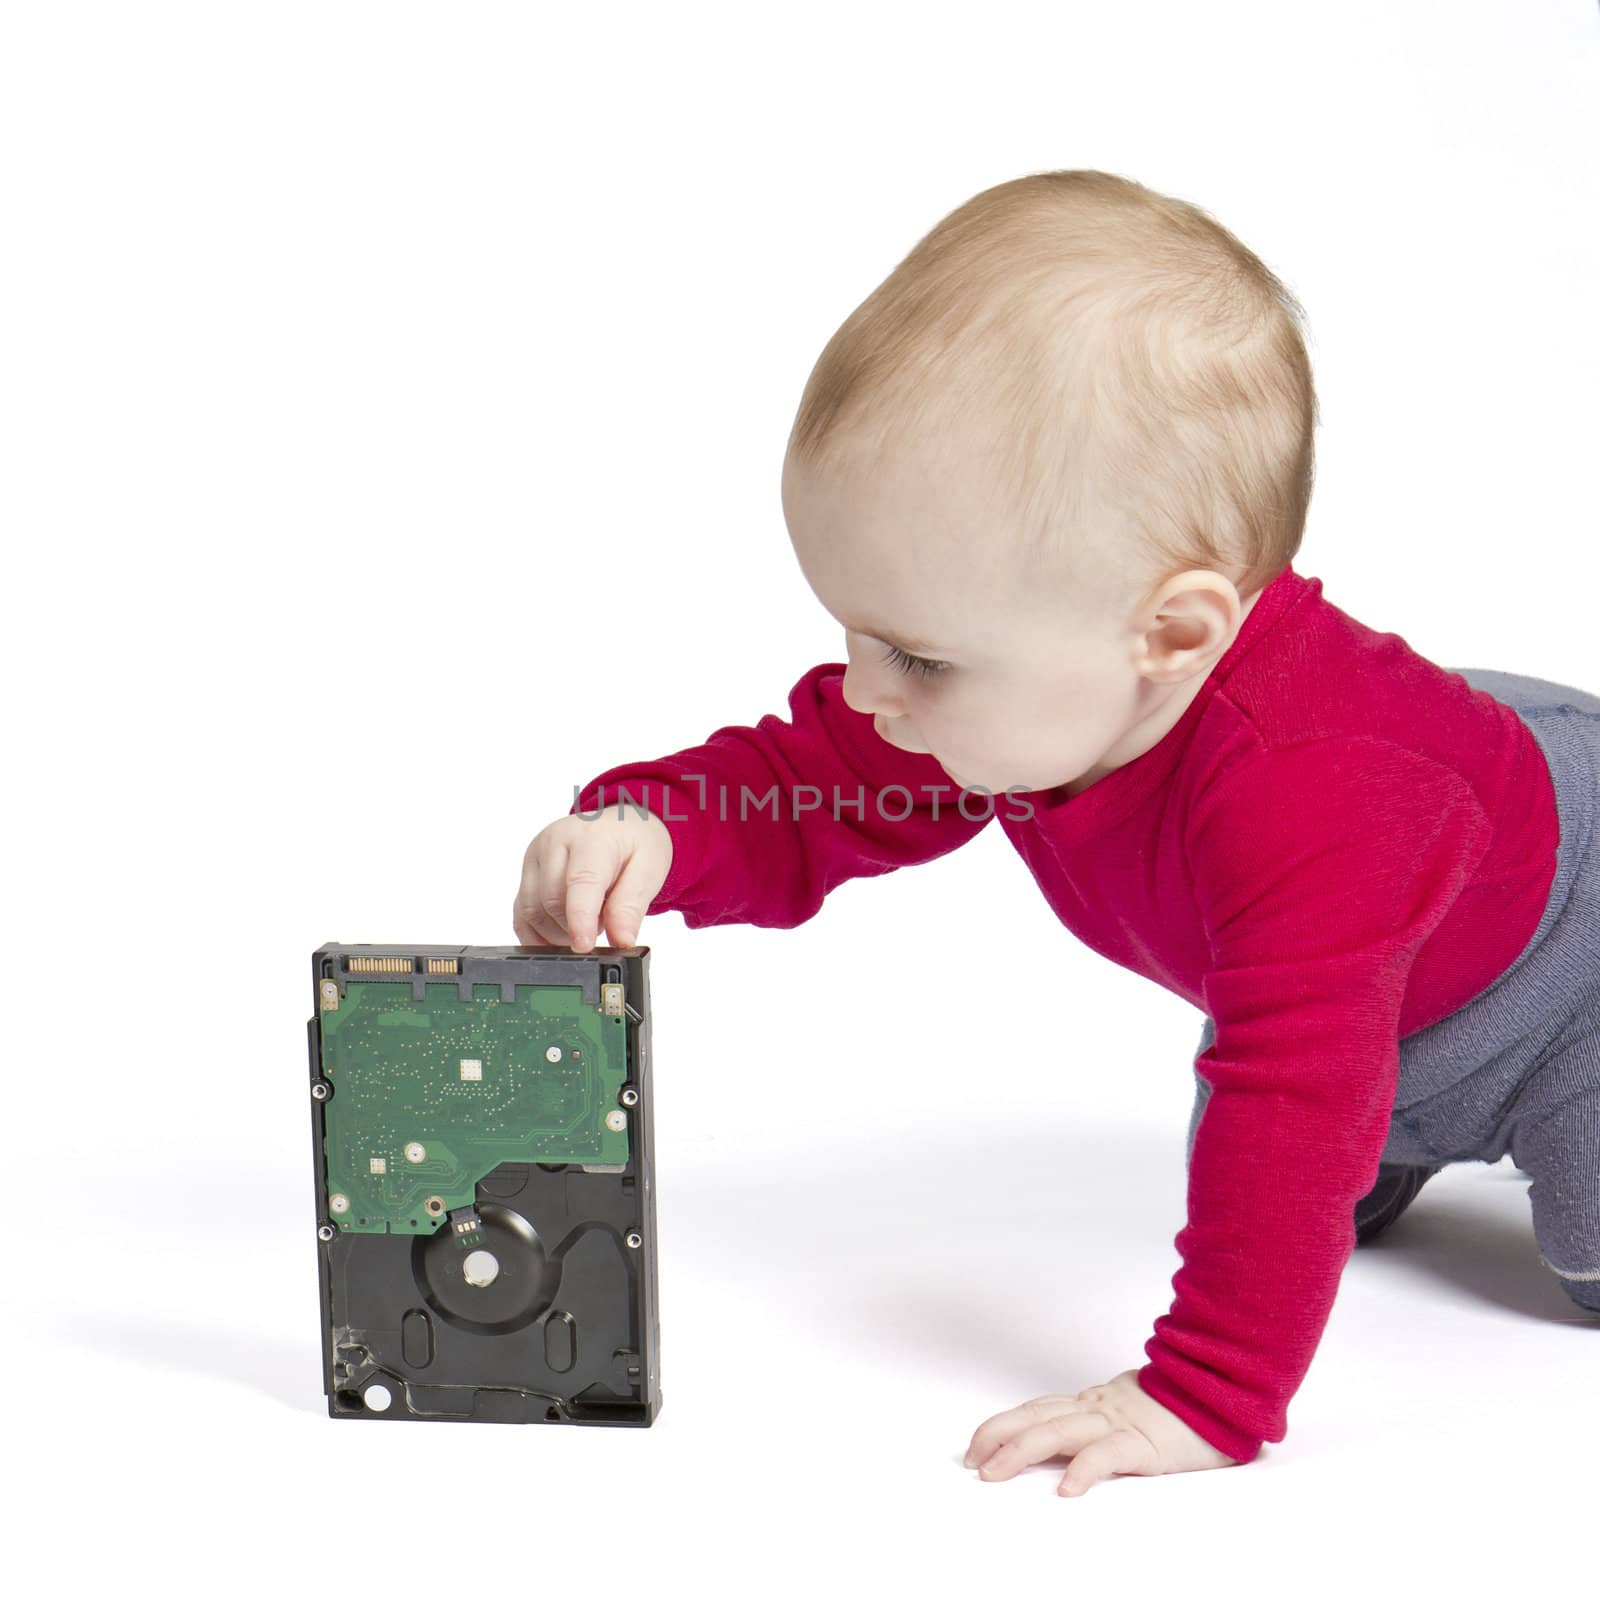 young child in white background with hard drive. red shirt and blue trousers